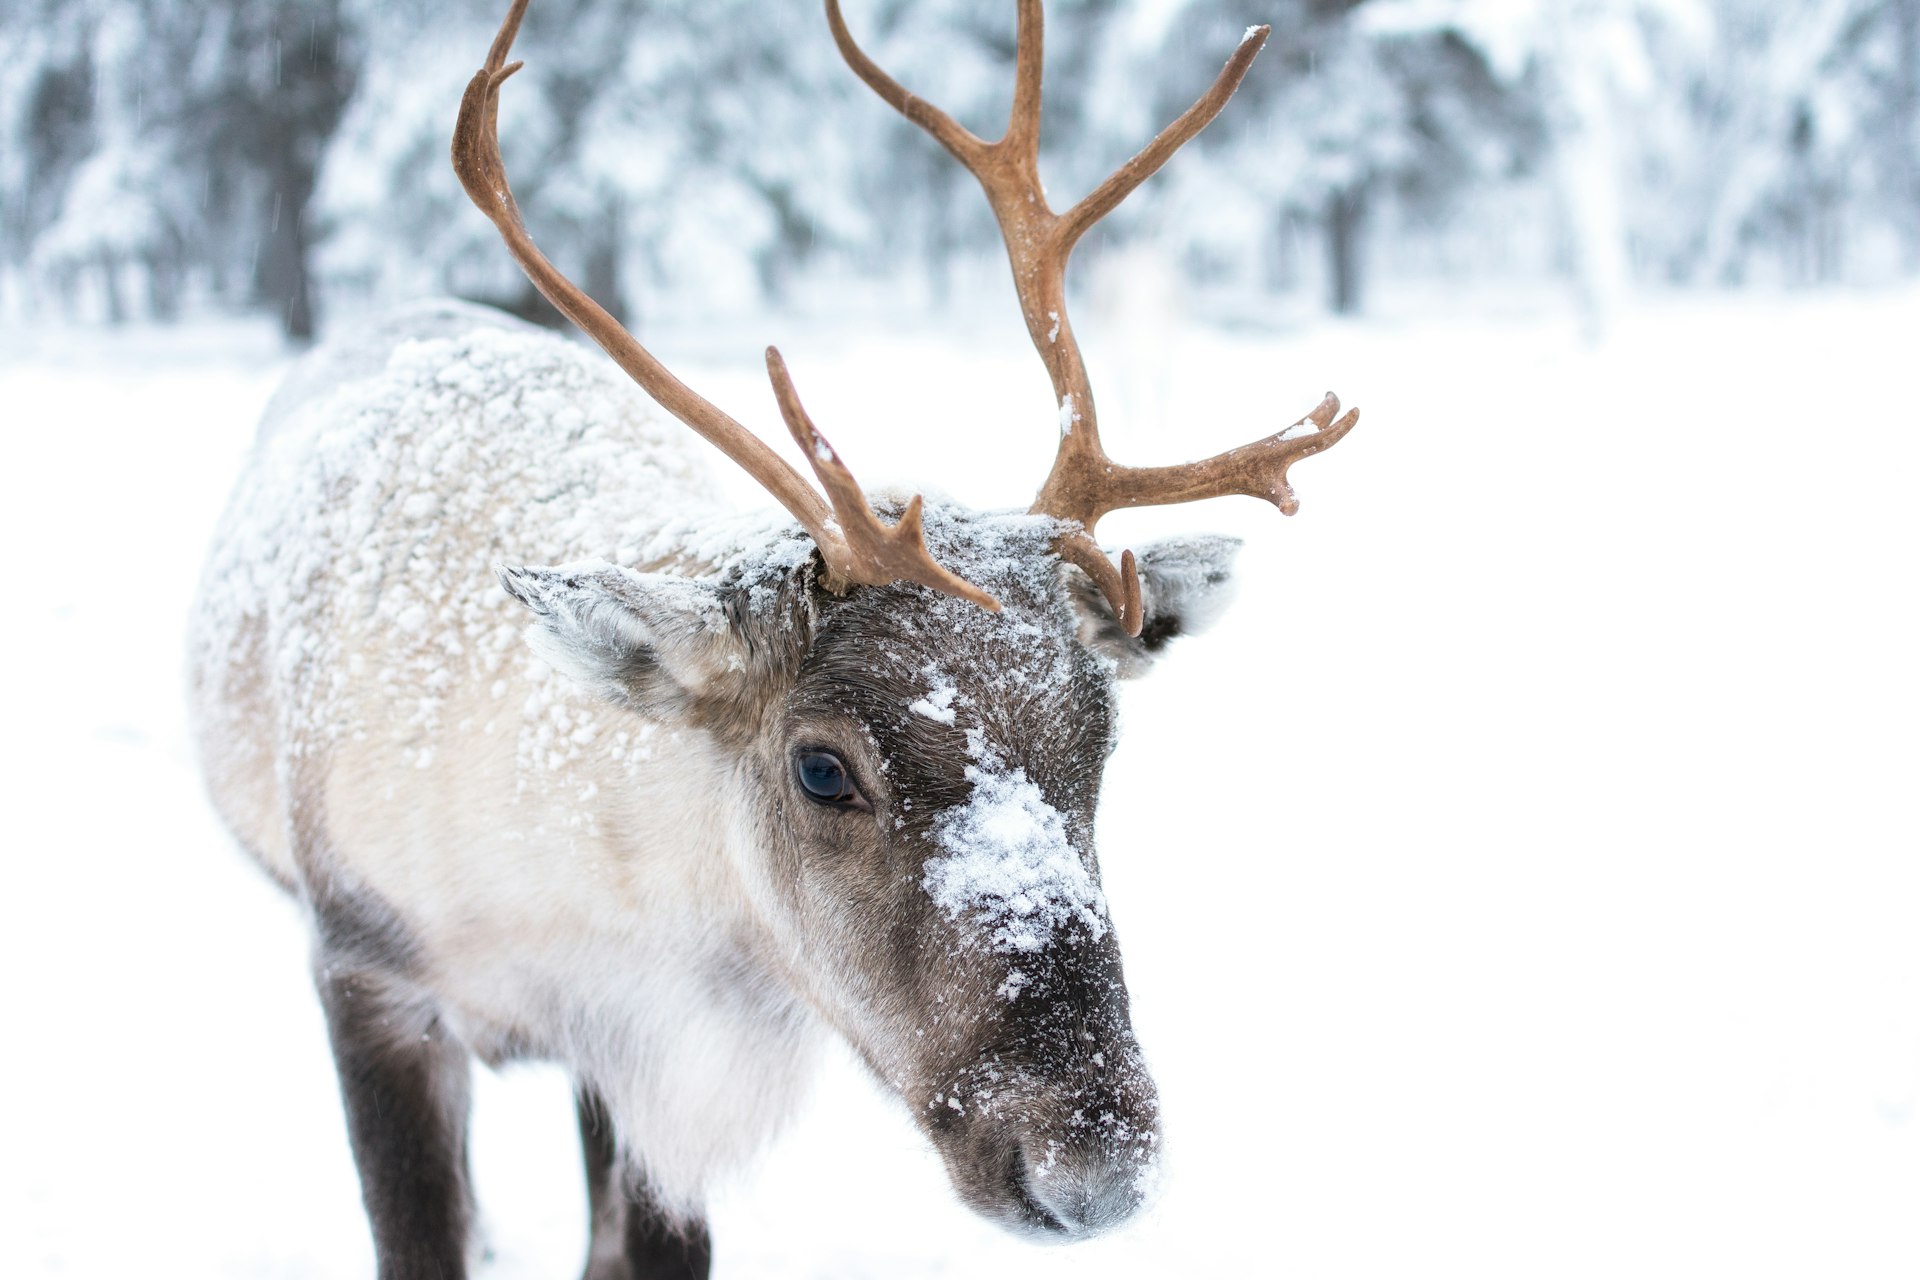 A young reindeer dusted in snow in Finland